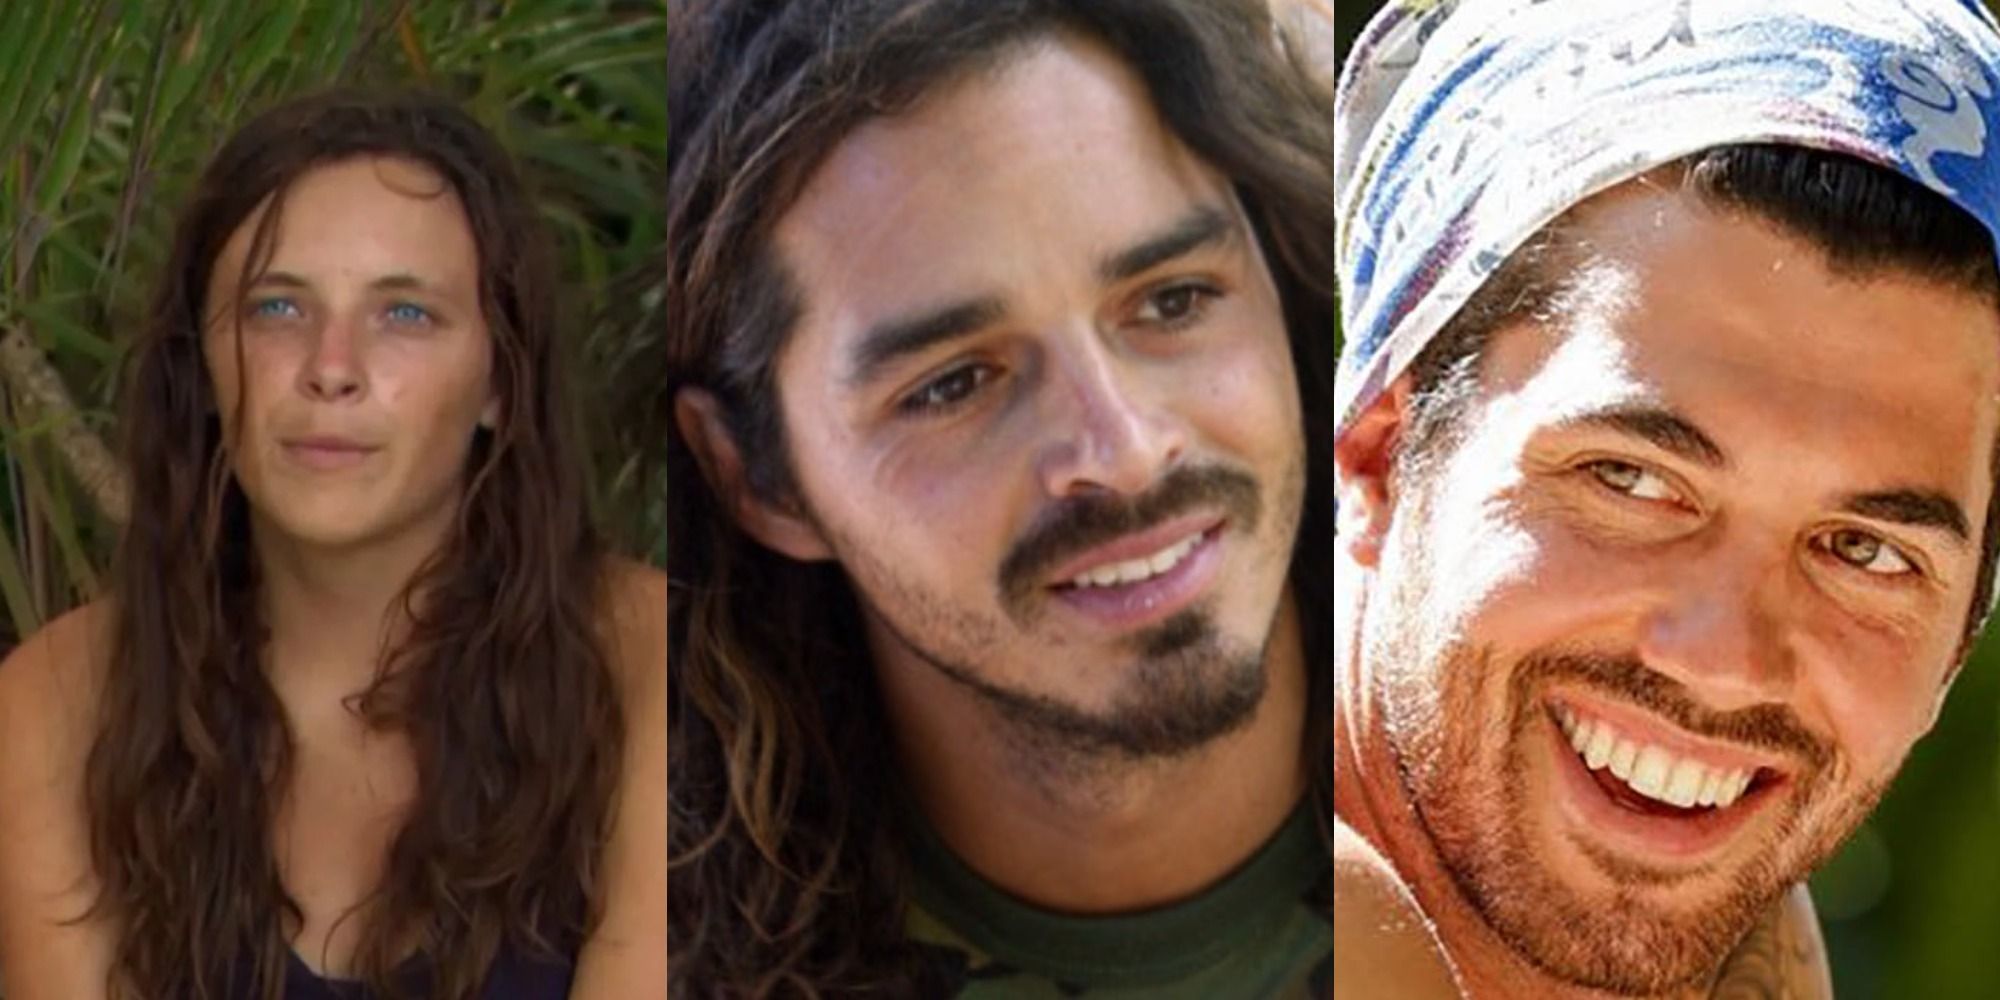 Survivor: 10 Players Fans Changed Their Minds About, According To Reddit